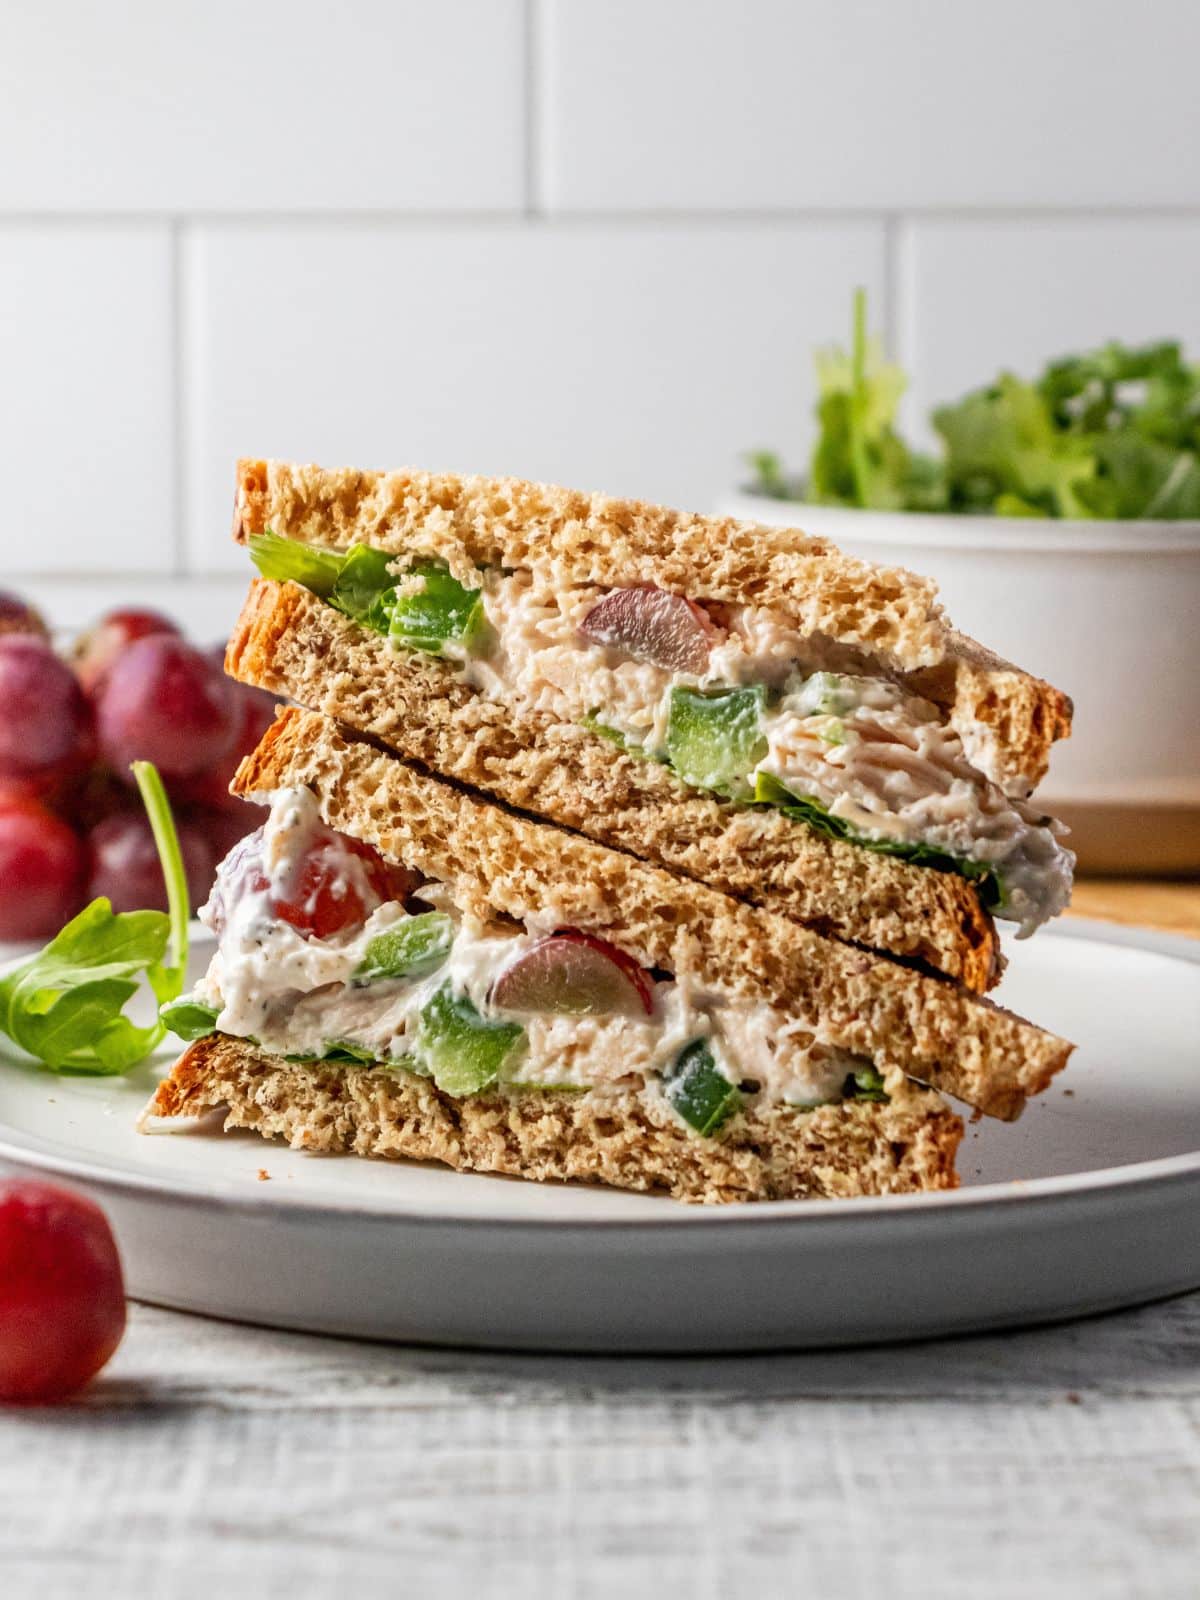 Meal Prep High Protein Chicken Salad!  Made with Greek yogurt, grapes & bell peppers this recipe is healthy, easy mayo free & egg free. Great for a quick meal, light lunch or appetizer. Gluten Free + Low Calorie